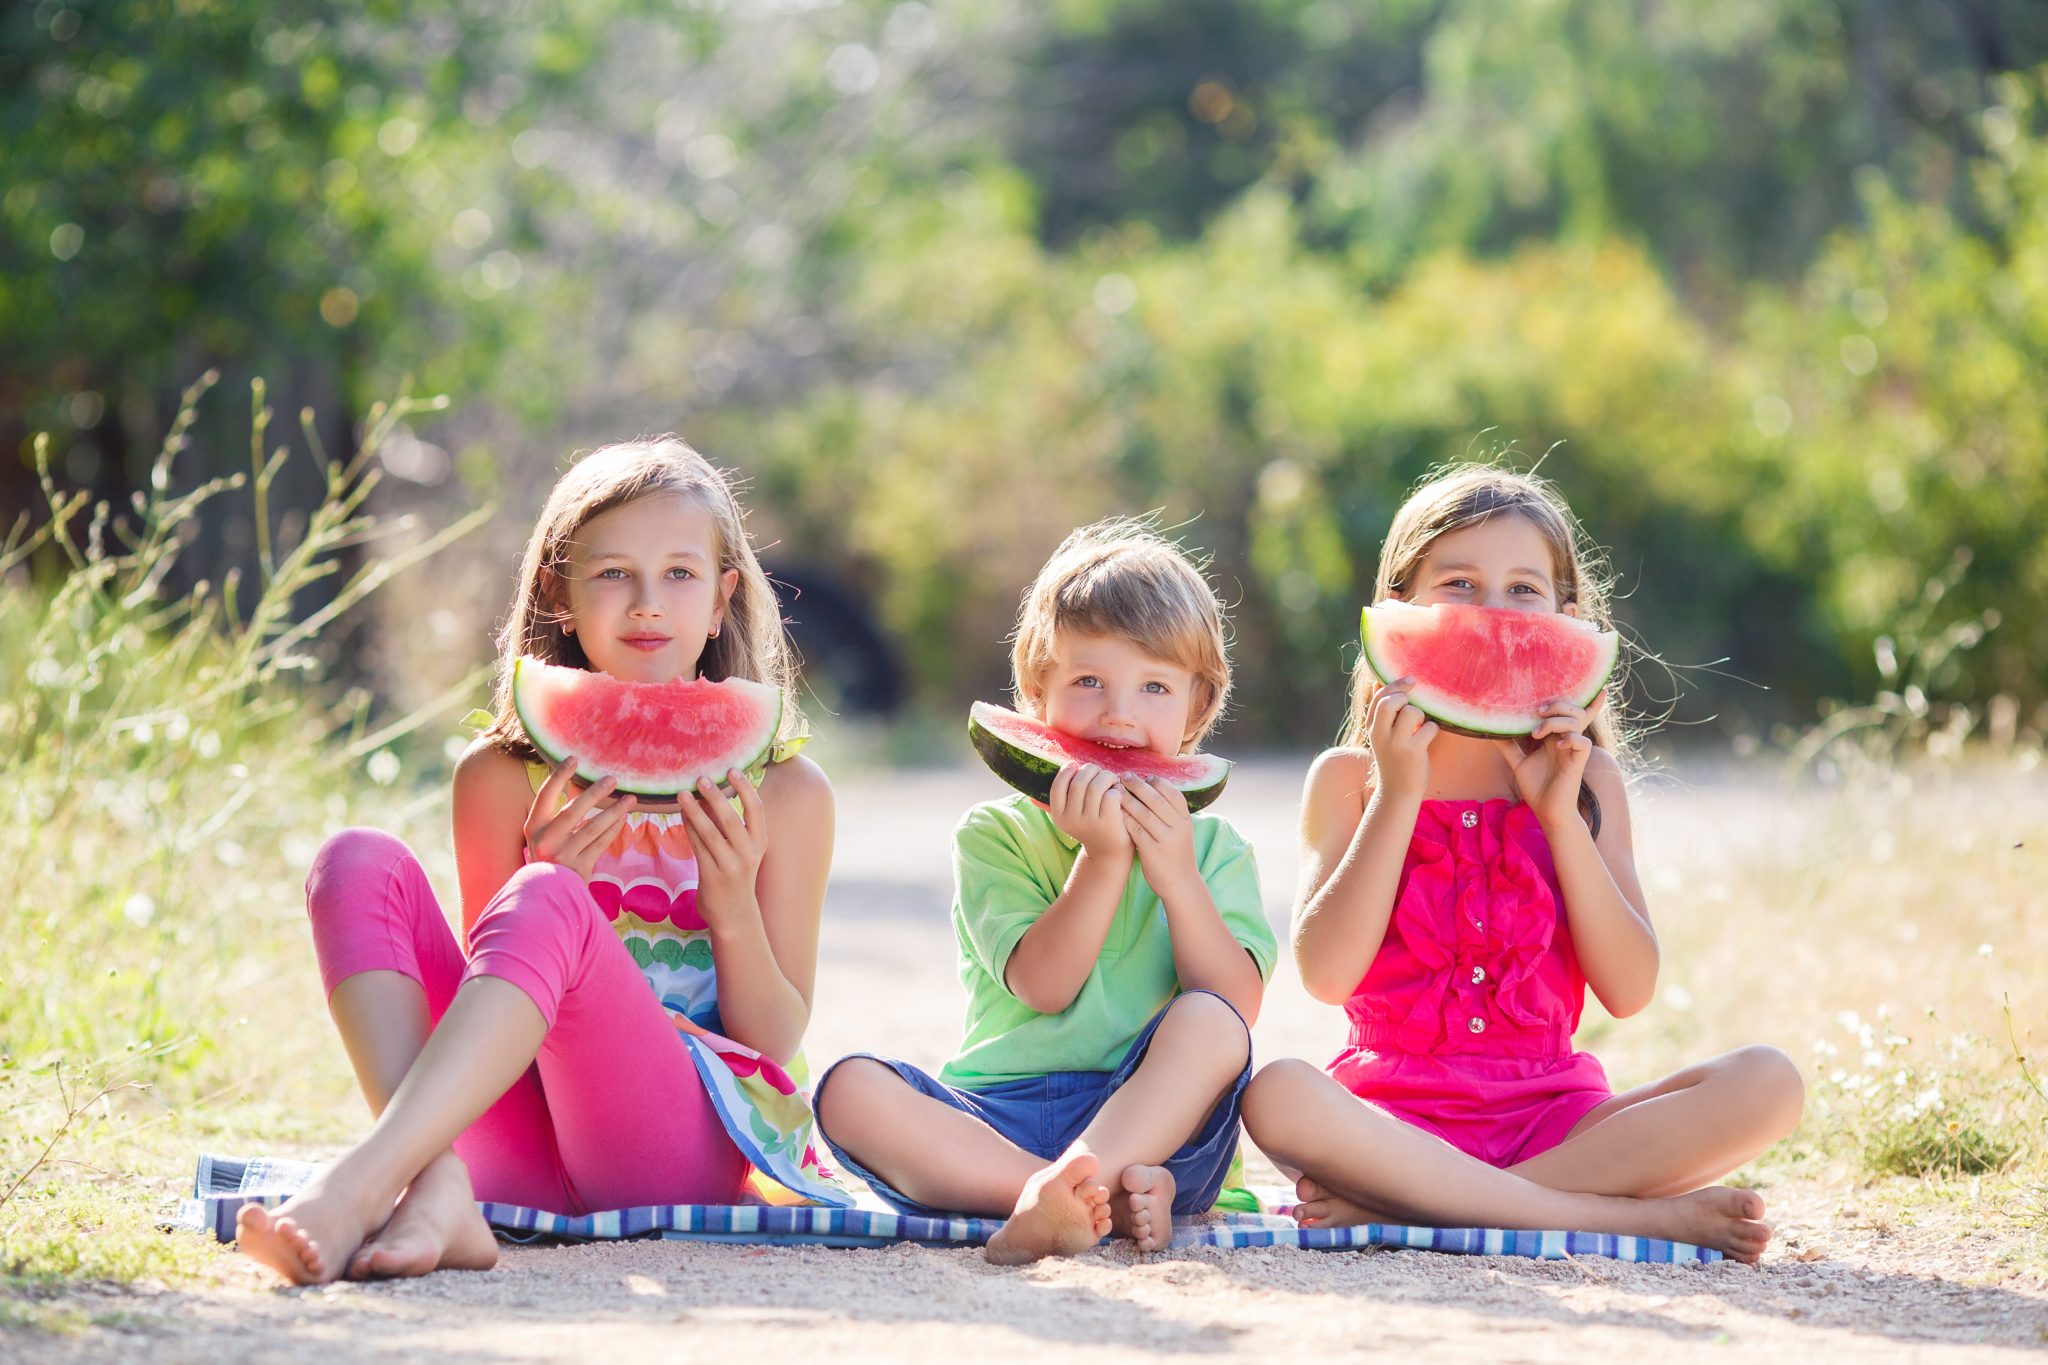 Sensory-based food education for preschools and after school clubs